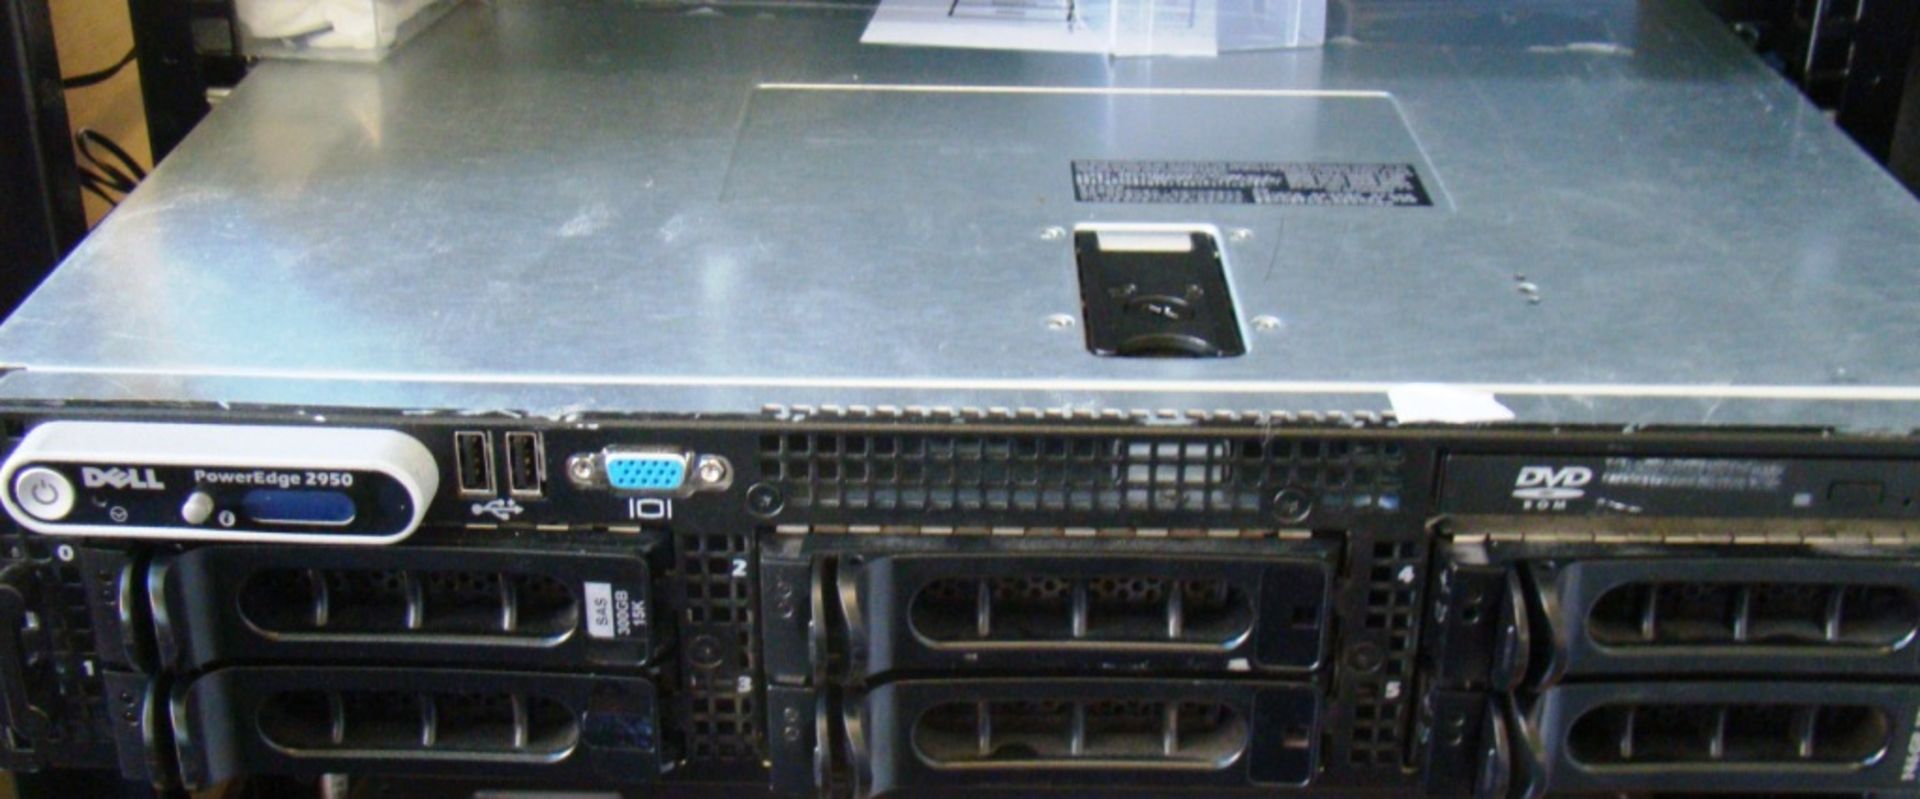 Dell 2950 PowerEdge 4 * Intel Xeon CPU 5130 @ 2.00Ghz 8GB 667 Mhz, 1 x 73.8 GB HDD + Windo - Image 8 of 9